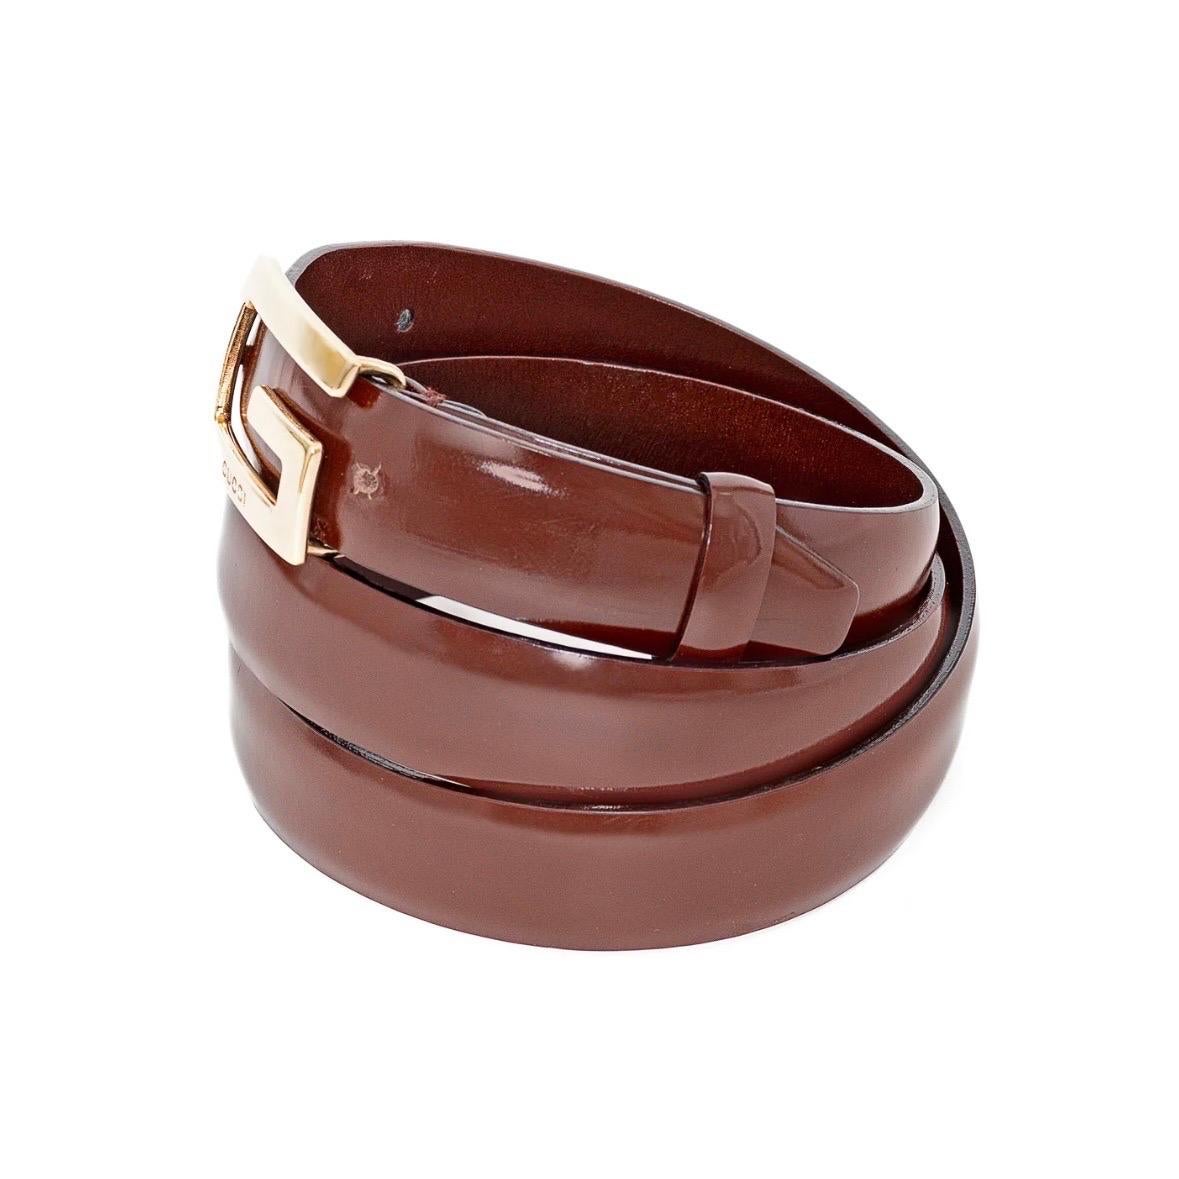 Brown and Gold-Tone G Buckle Belt by Gucci
Tom Ford era
Chestnut brown
Gold-Tone 